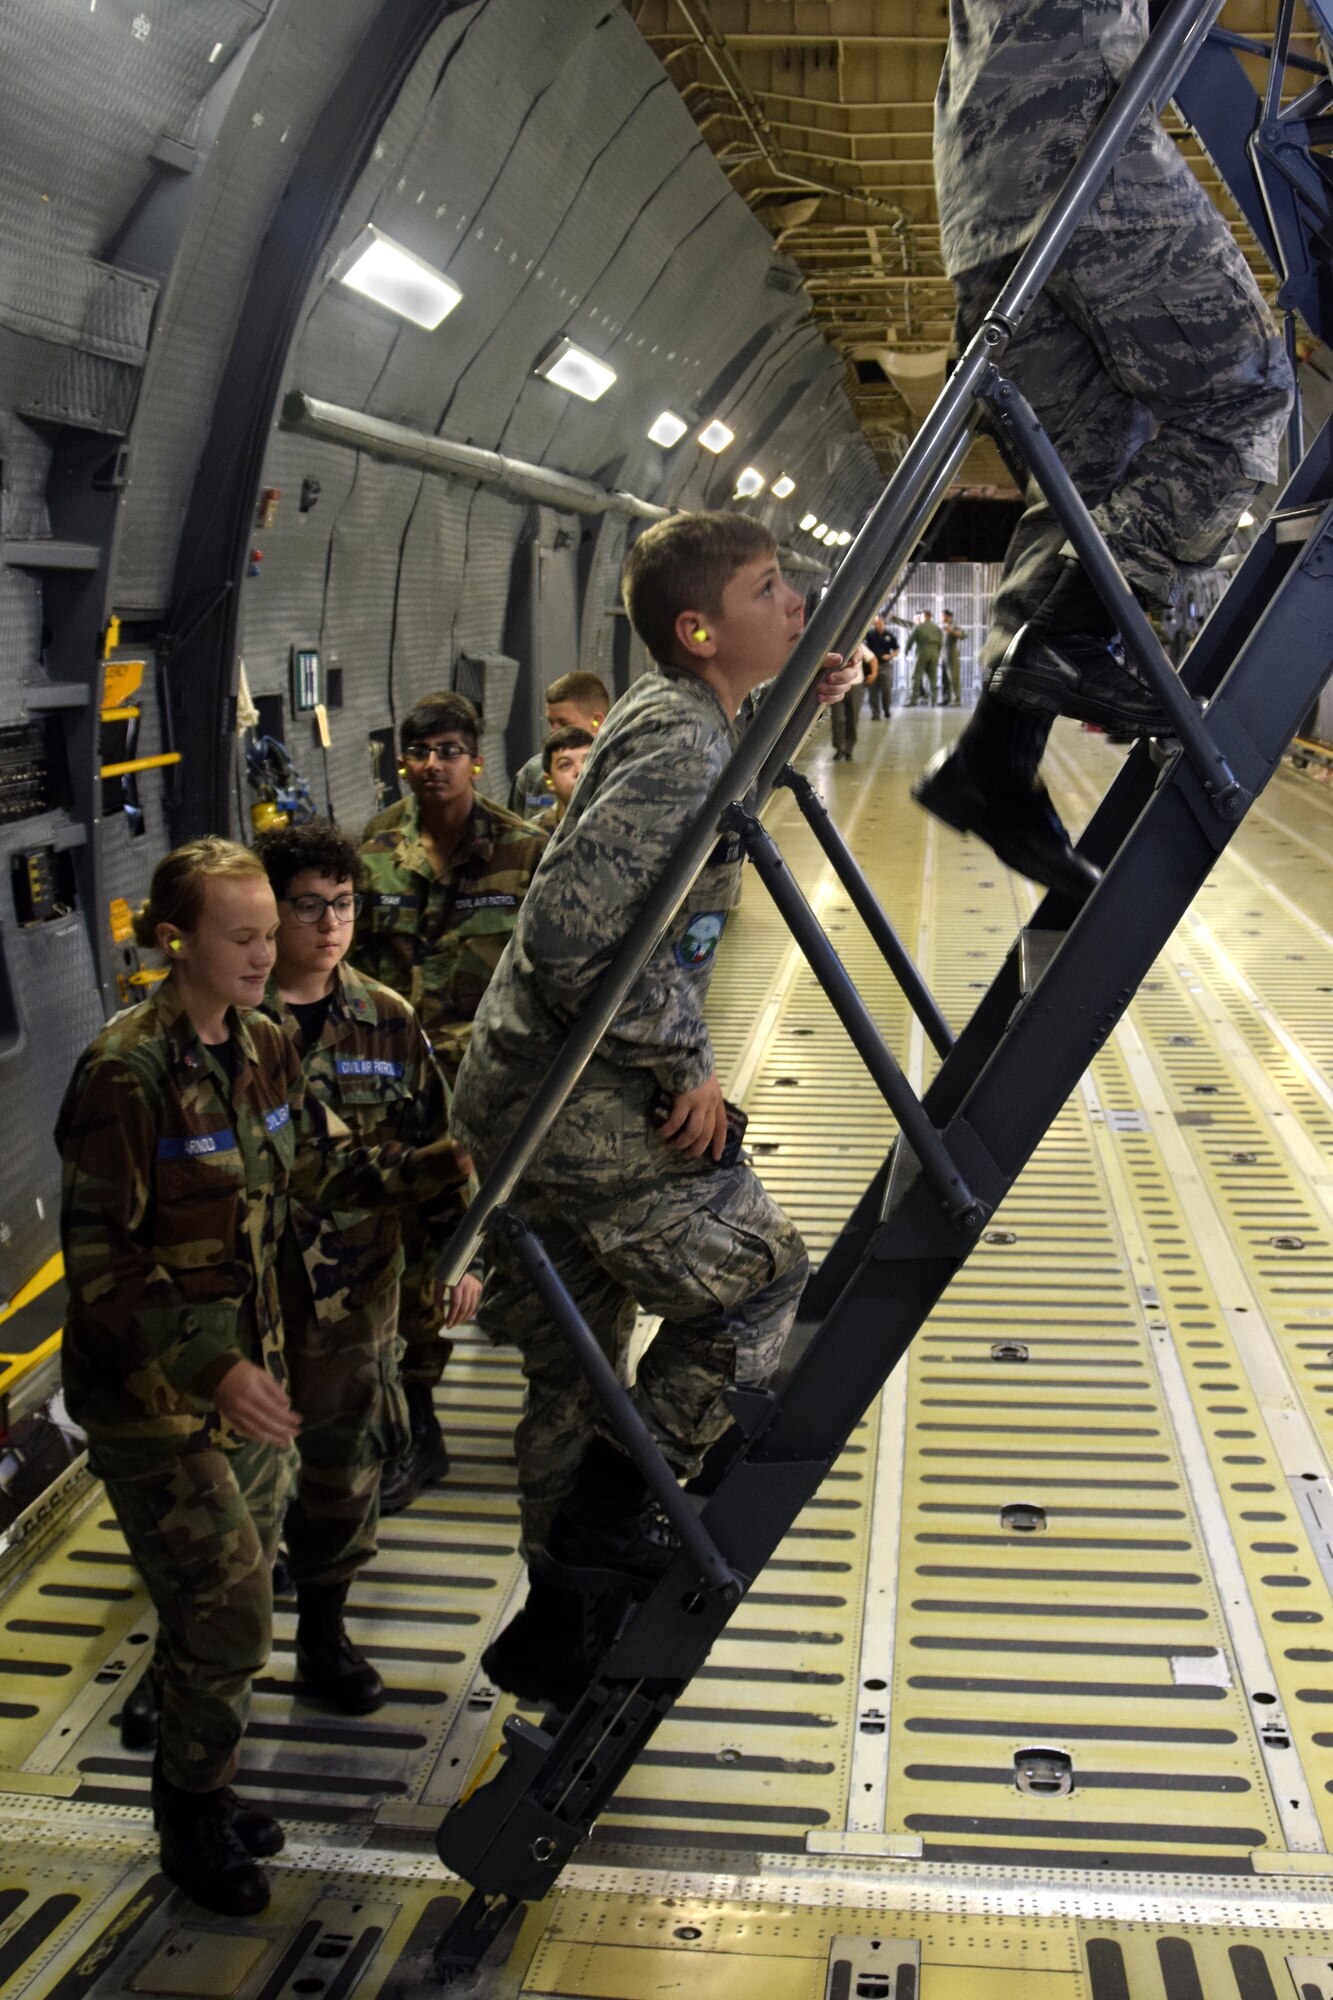 U.S. Air Force Civil Air Patrol cadets climb the rear section’s stairs to the 433rd Airlift Wing C-5M Super Galaxy aircraft’s upper deck at Joint Base San Antonio-Lackland, Texas, June 8, 2018. Members of the official Air Force auxiliary fly nearly 100,000 hours per year performing disaster relief, counterdrug, search and rescue, fighter interceptor training, aerial observation and cadet orientation flights. (U.S. Air Force photo by Staff Sgt. Lauren M. Snyder)